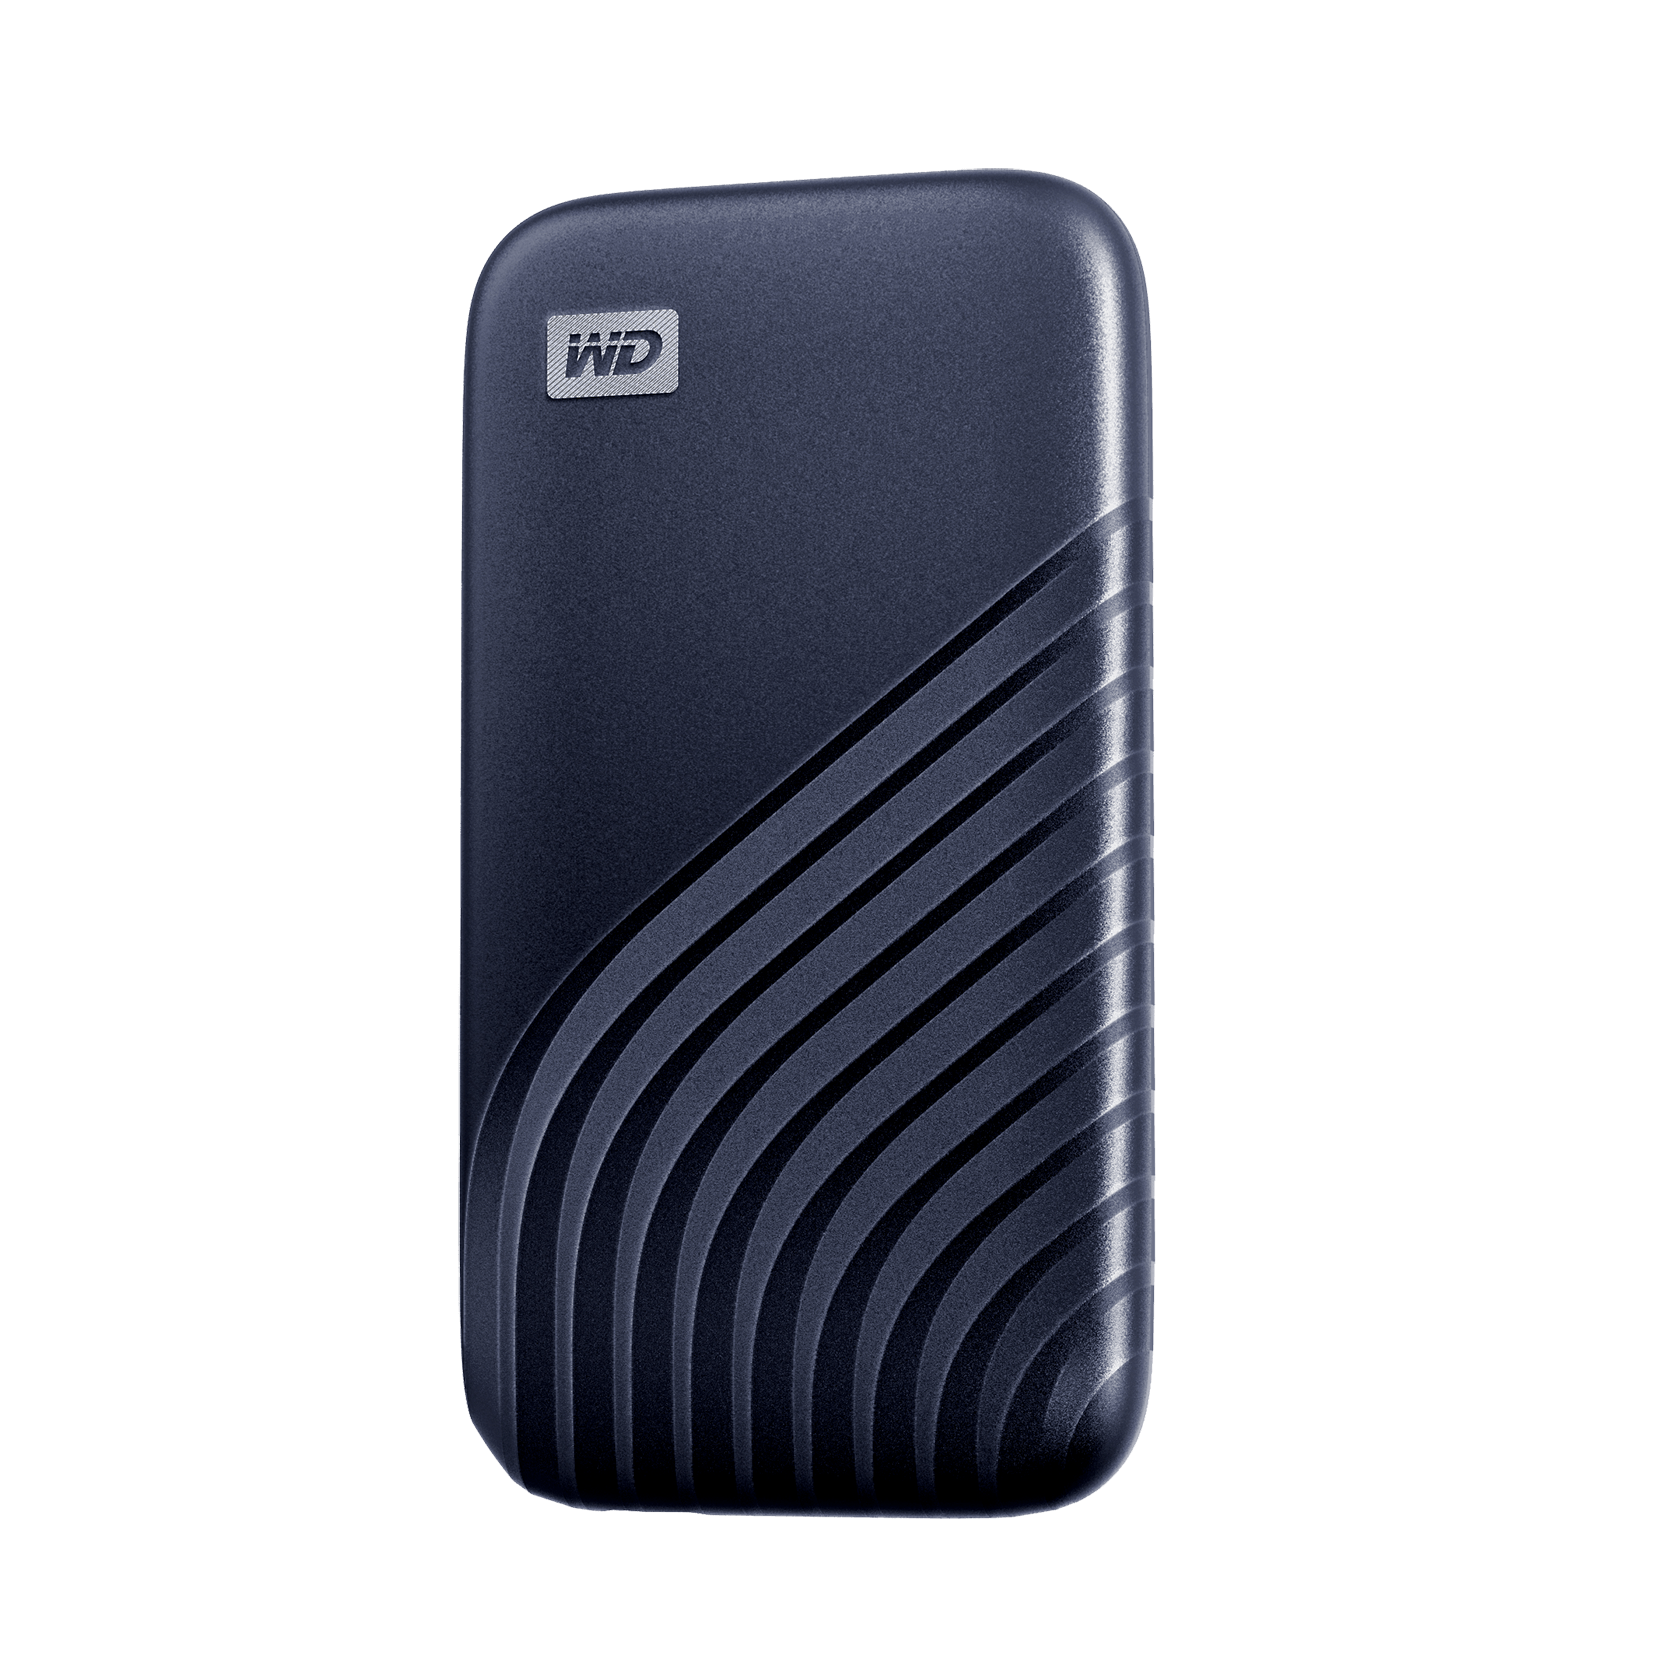 WD 2TB My Passport SSD, Portable External Solid State Drive, Blue - WDBAGF0020BBL-WESN - image 3 of 8